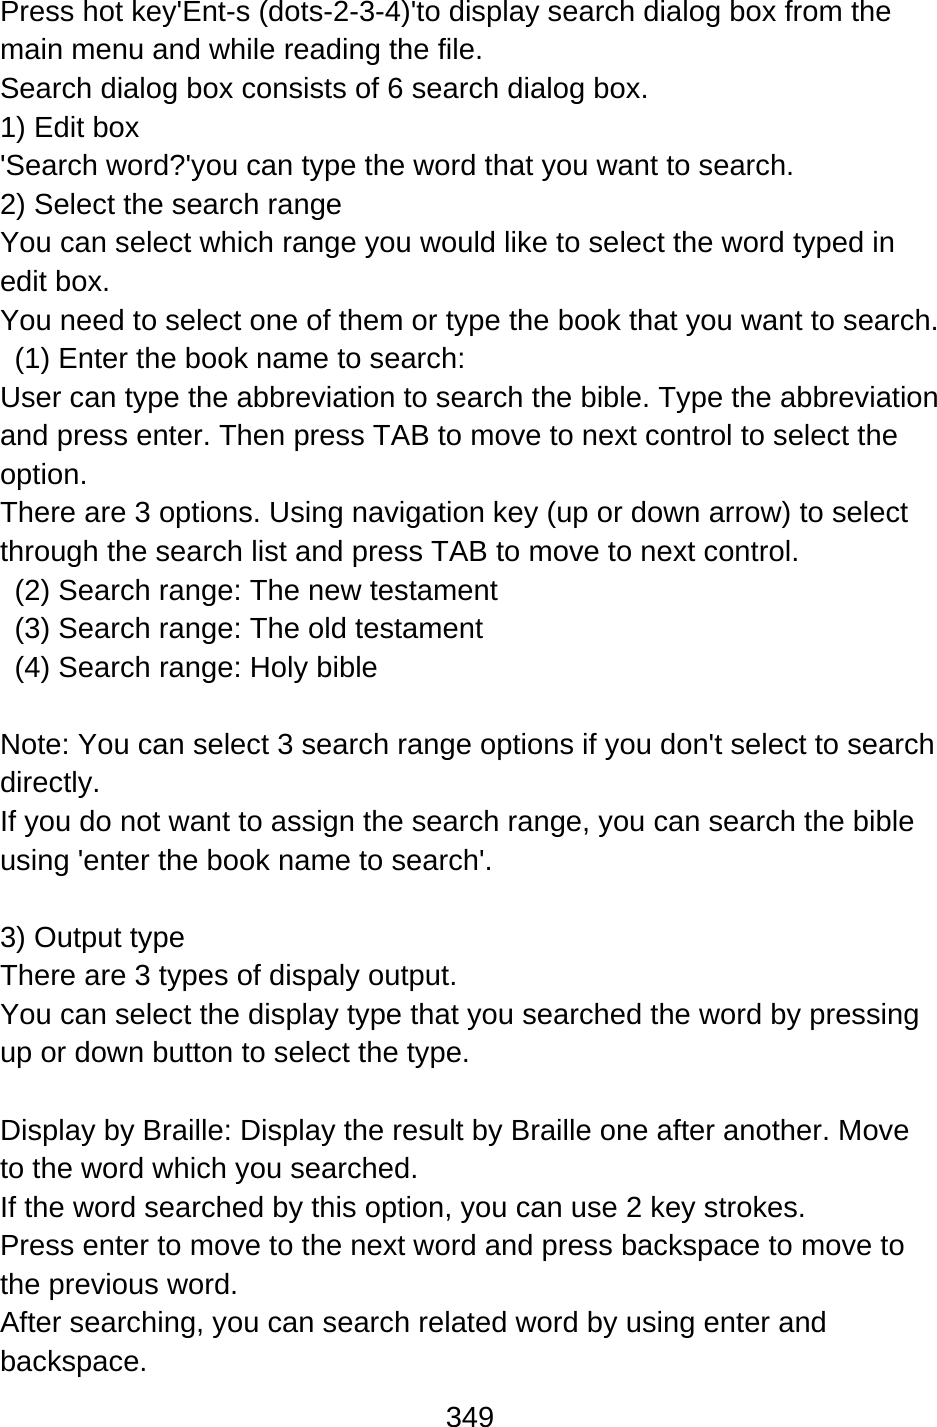 349  Press hot key&apos;Ent-s (dots-2-3-4)&apos;to display search dialog box from the main menu and while reading the file. Search dialog box consists of 6 search dialog box. 1) Edit box &apos;Search word?&apos;you can type the word that you want to search. 2) Select the search range You can select which range you would like to select the word typed in edit box. You need to select one of them or type the book that you want to search.   (1) Enter the book name to search:   User can type the abbreviation to search the bible. Type the abbreviation and press enter. Then press TAB to move to next control to select the option. There are 3 options. Using navigation key (up or down arrow) to select through the search list and press TAB to move to next control.   (2) Search range: The new testament   (3) Search range: The old testament   (4) Search range: Holy bible  Note: You can select 3 search range options if you don&apos;t select to search directly.  If you do not want to assign the search range, you can search the bible using &apos;enter the book name to search&apos;.  3) Output type   There are 3 types of dispaly output.   You can select the display type that you searched the word by pressing up or down button to select the type.  Display by Braille: Display the result by Braille one after another. Move to the word which you searched.   If the word searched by this option, you can use 2 key strokes. Press enter to move to the next word and press backspace to move to the previous word. After searching, you can search related word by using enter and backspace.  